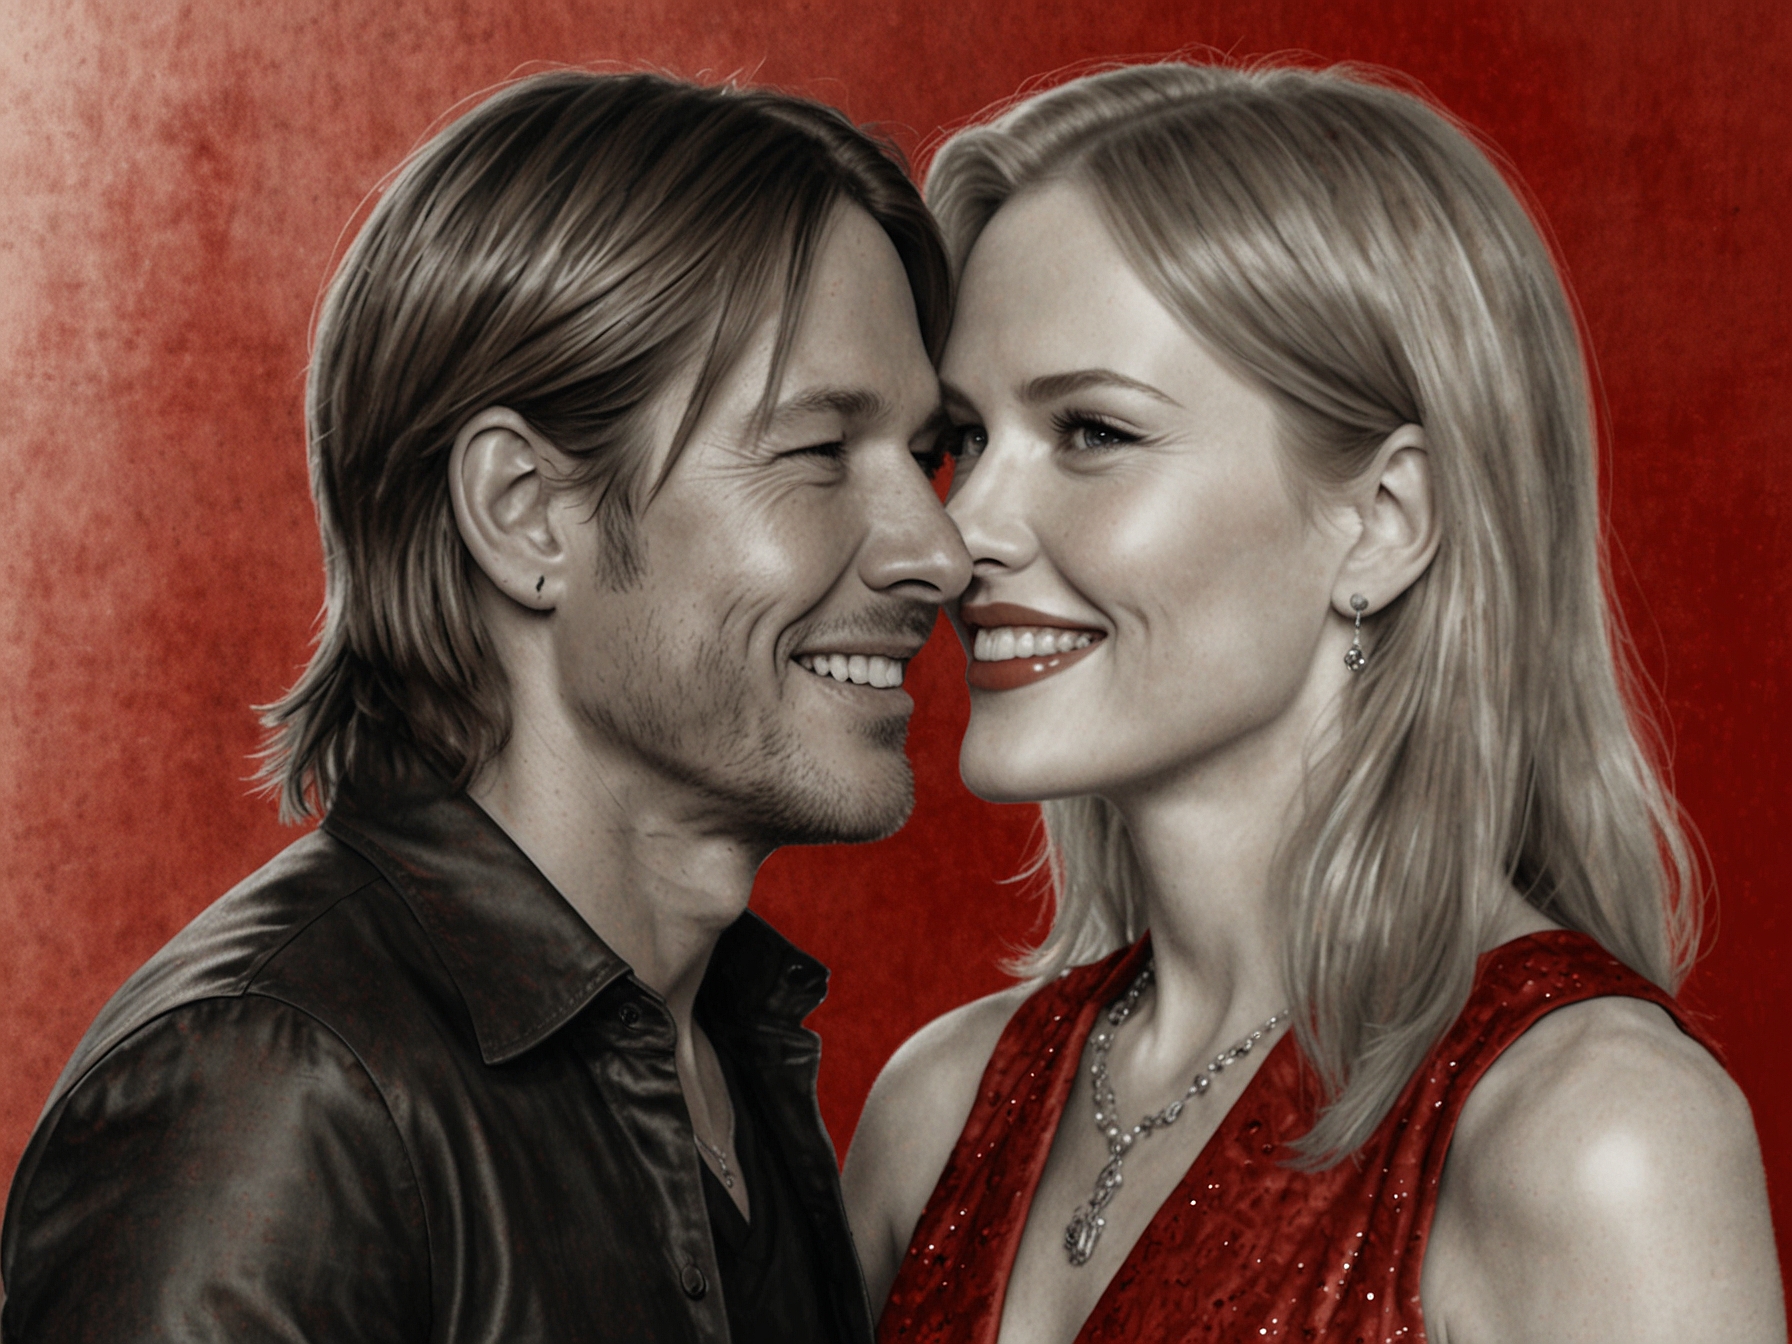 Keith Urban and Nicole Kidman smiling at a red carpet event, showcasing their unwavering support and love for each other despite past challenges and Keith's struggles with addiction.